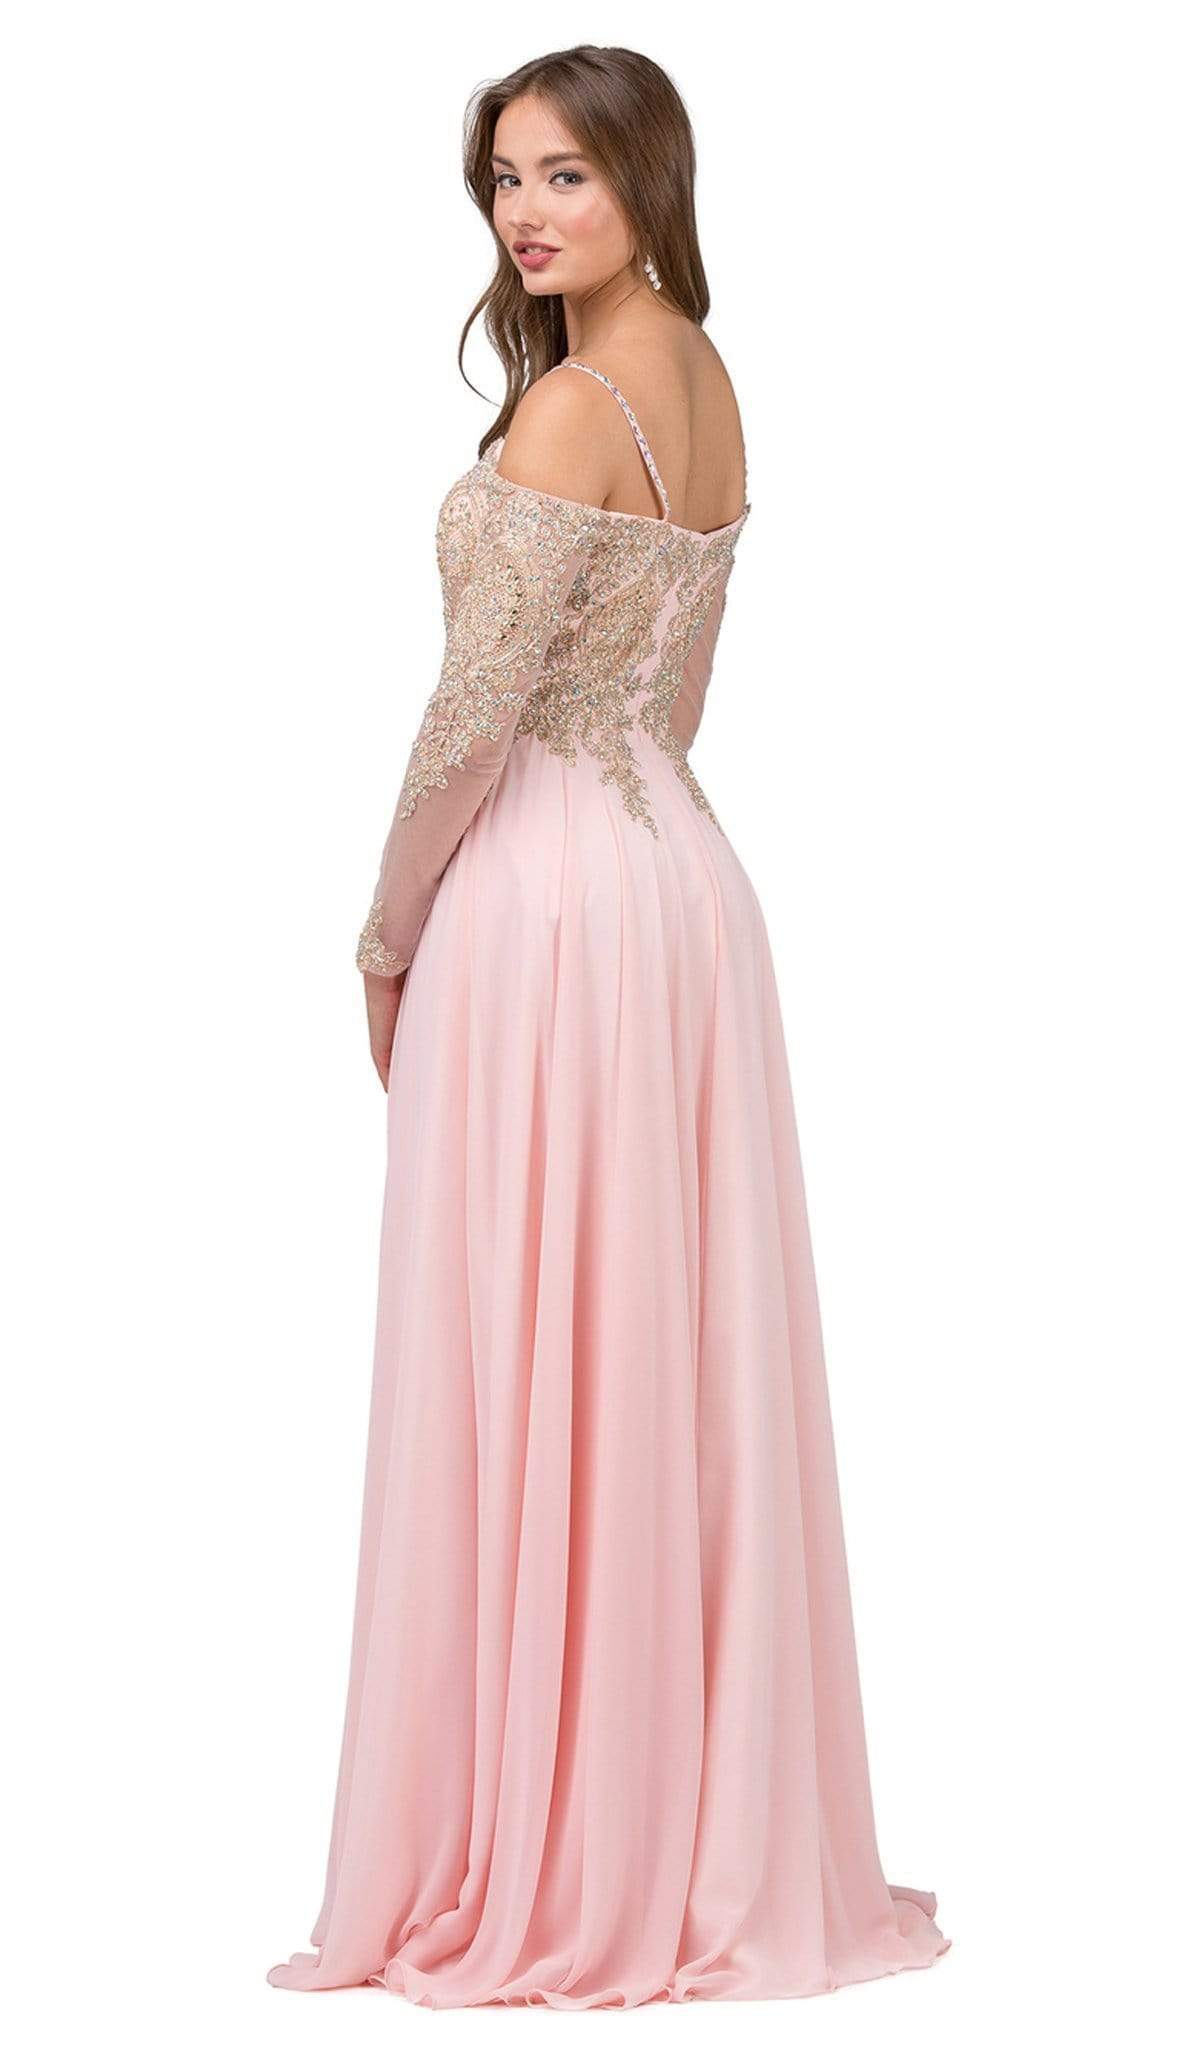 Dancing Queen - 2422 Appliqued Sheer Long Sleeves A-Line Prom Gown Special Occasion Dress M / Blush